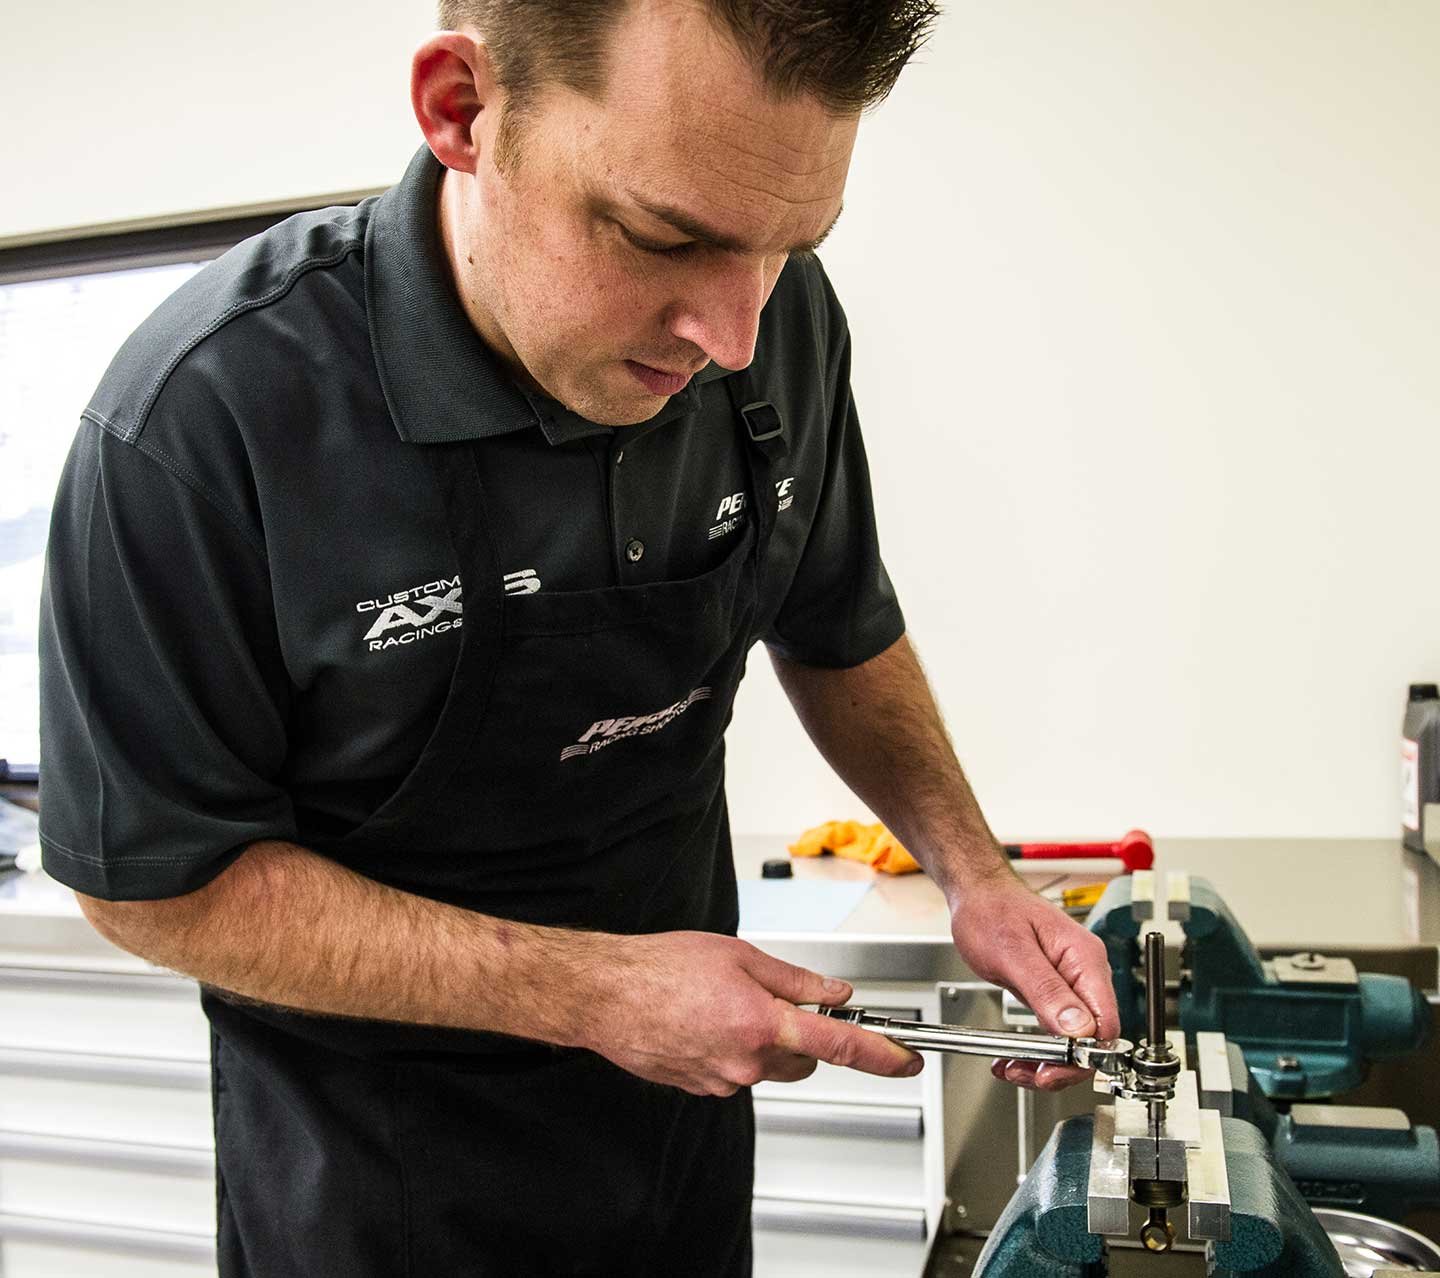 Live virtual training: with access to Penske Racing Shocks technicians